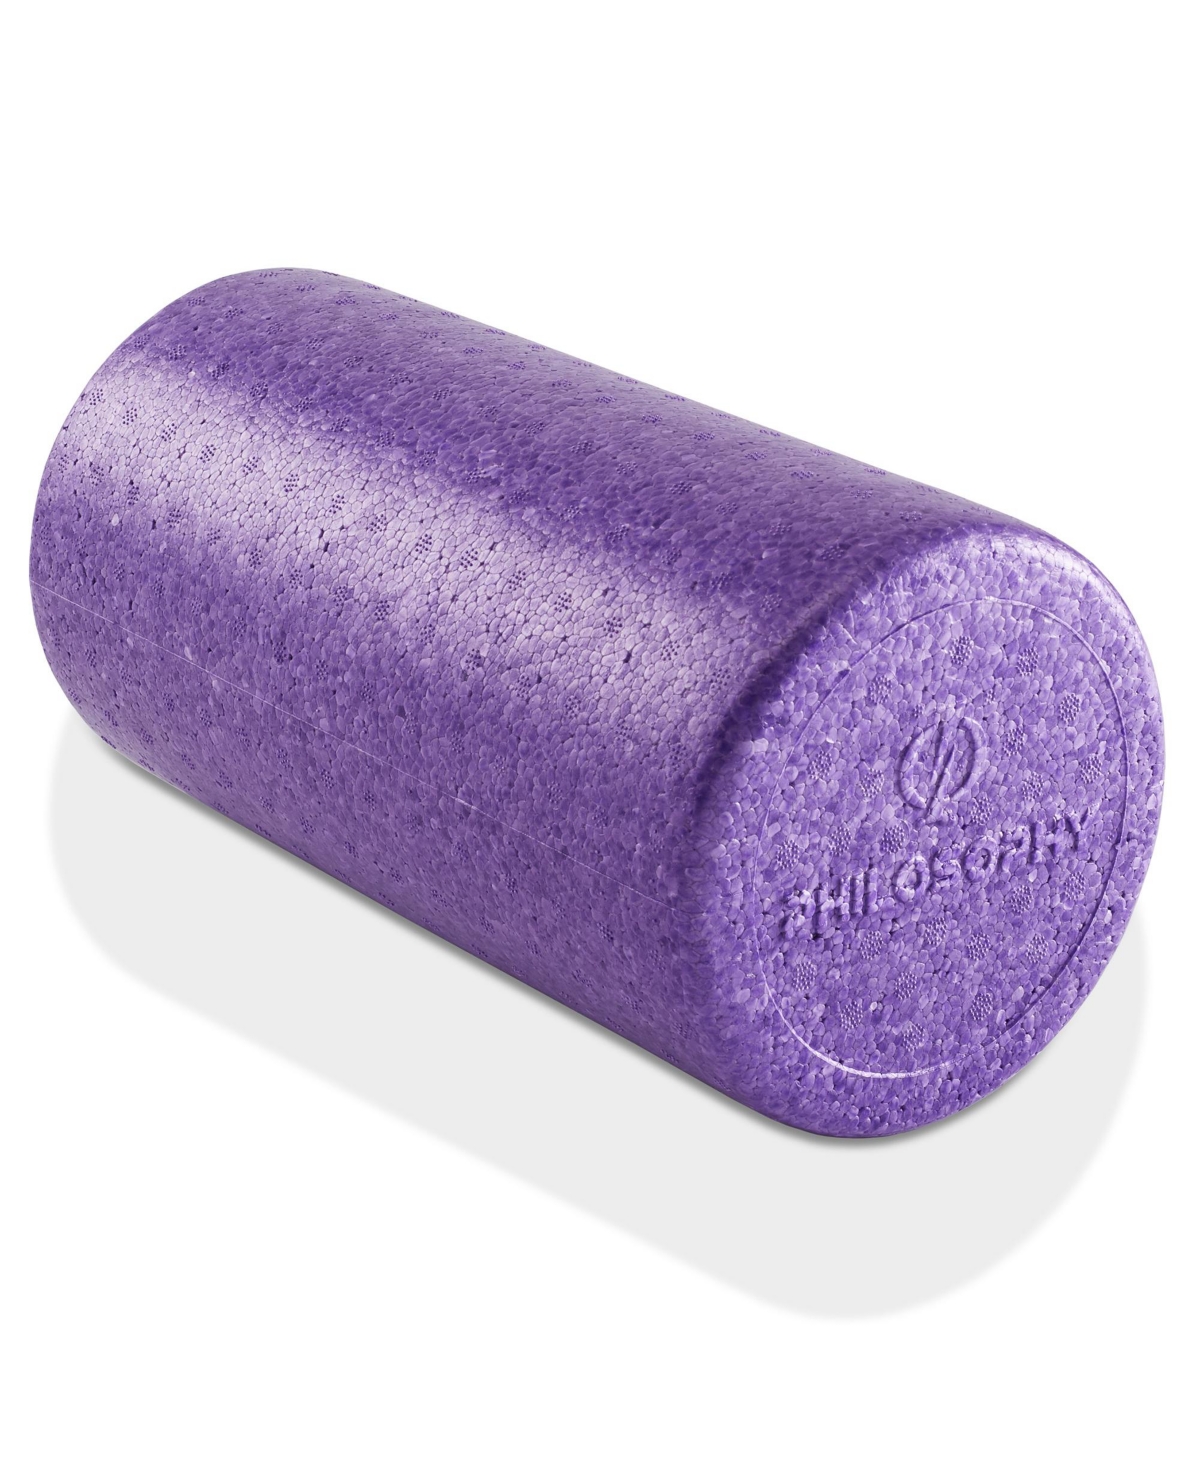 12" High-Density Foam Roller for Exercise, Massage, Muscle Recovery - Round, Purple - Purple